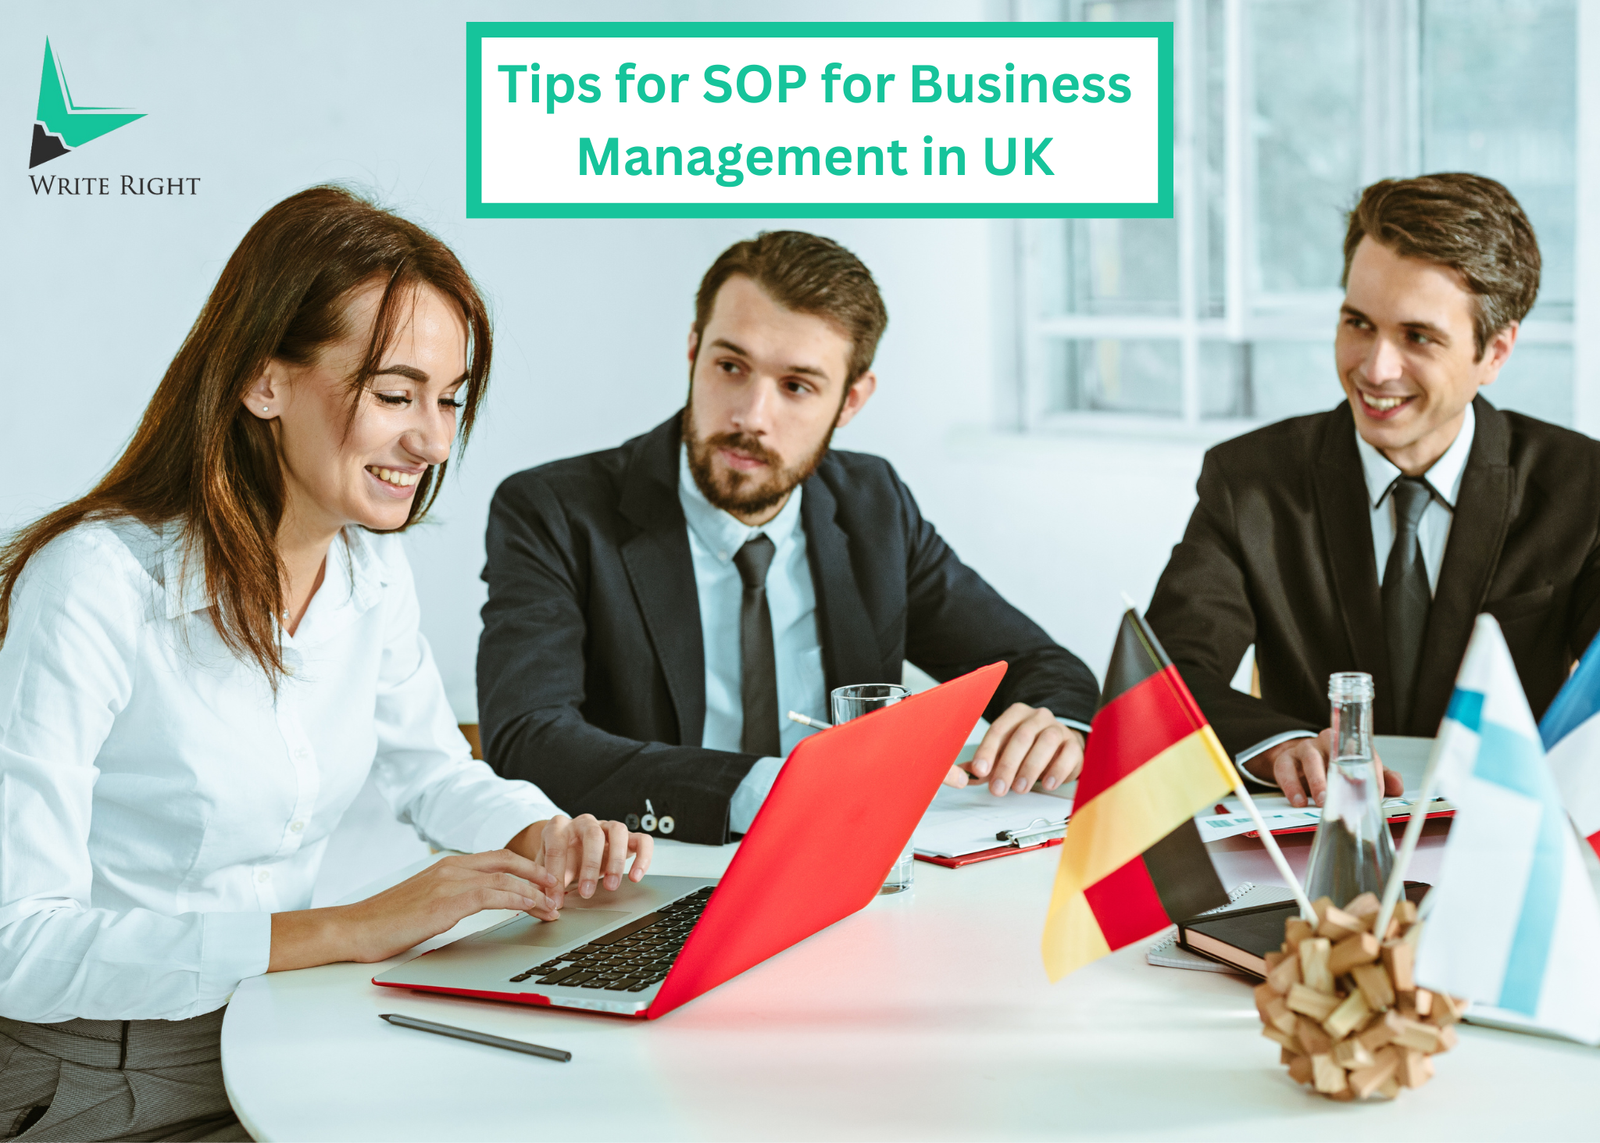 Tips for SOP for Business Management in UK